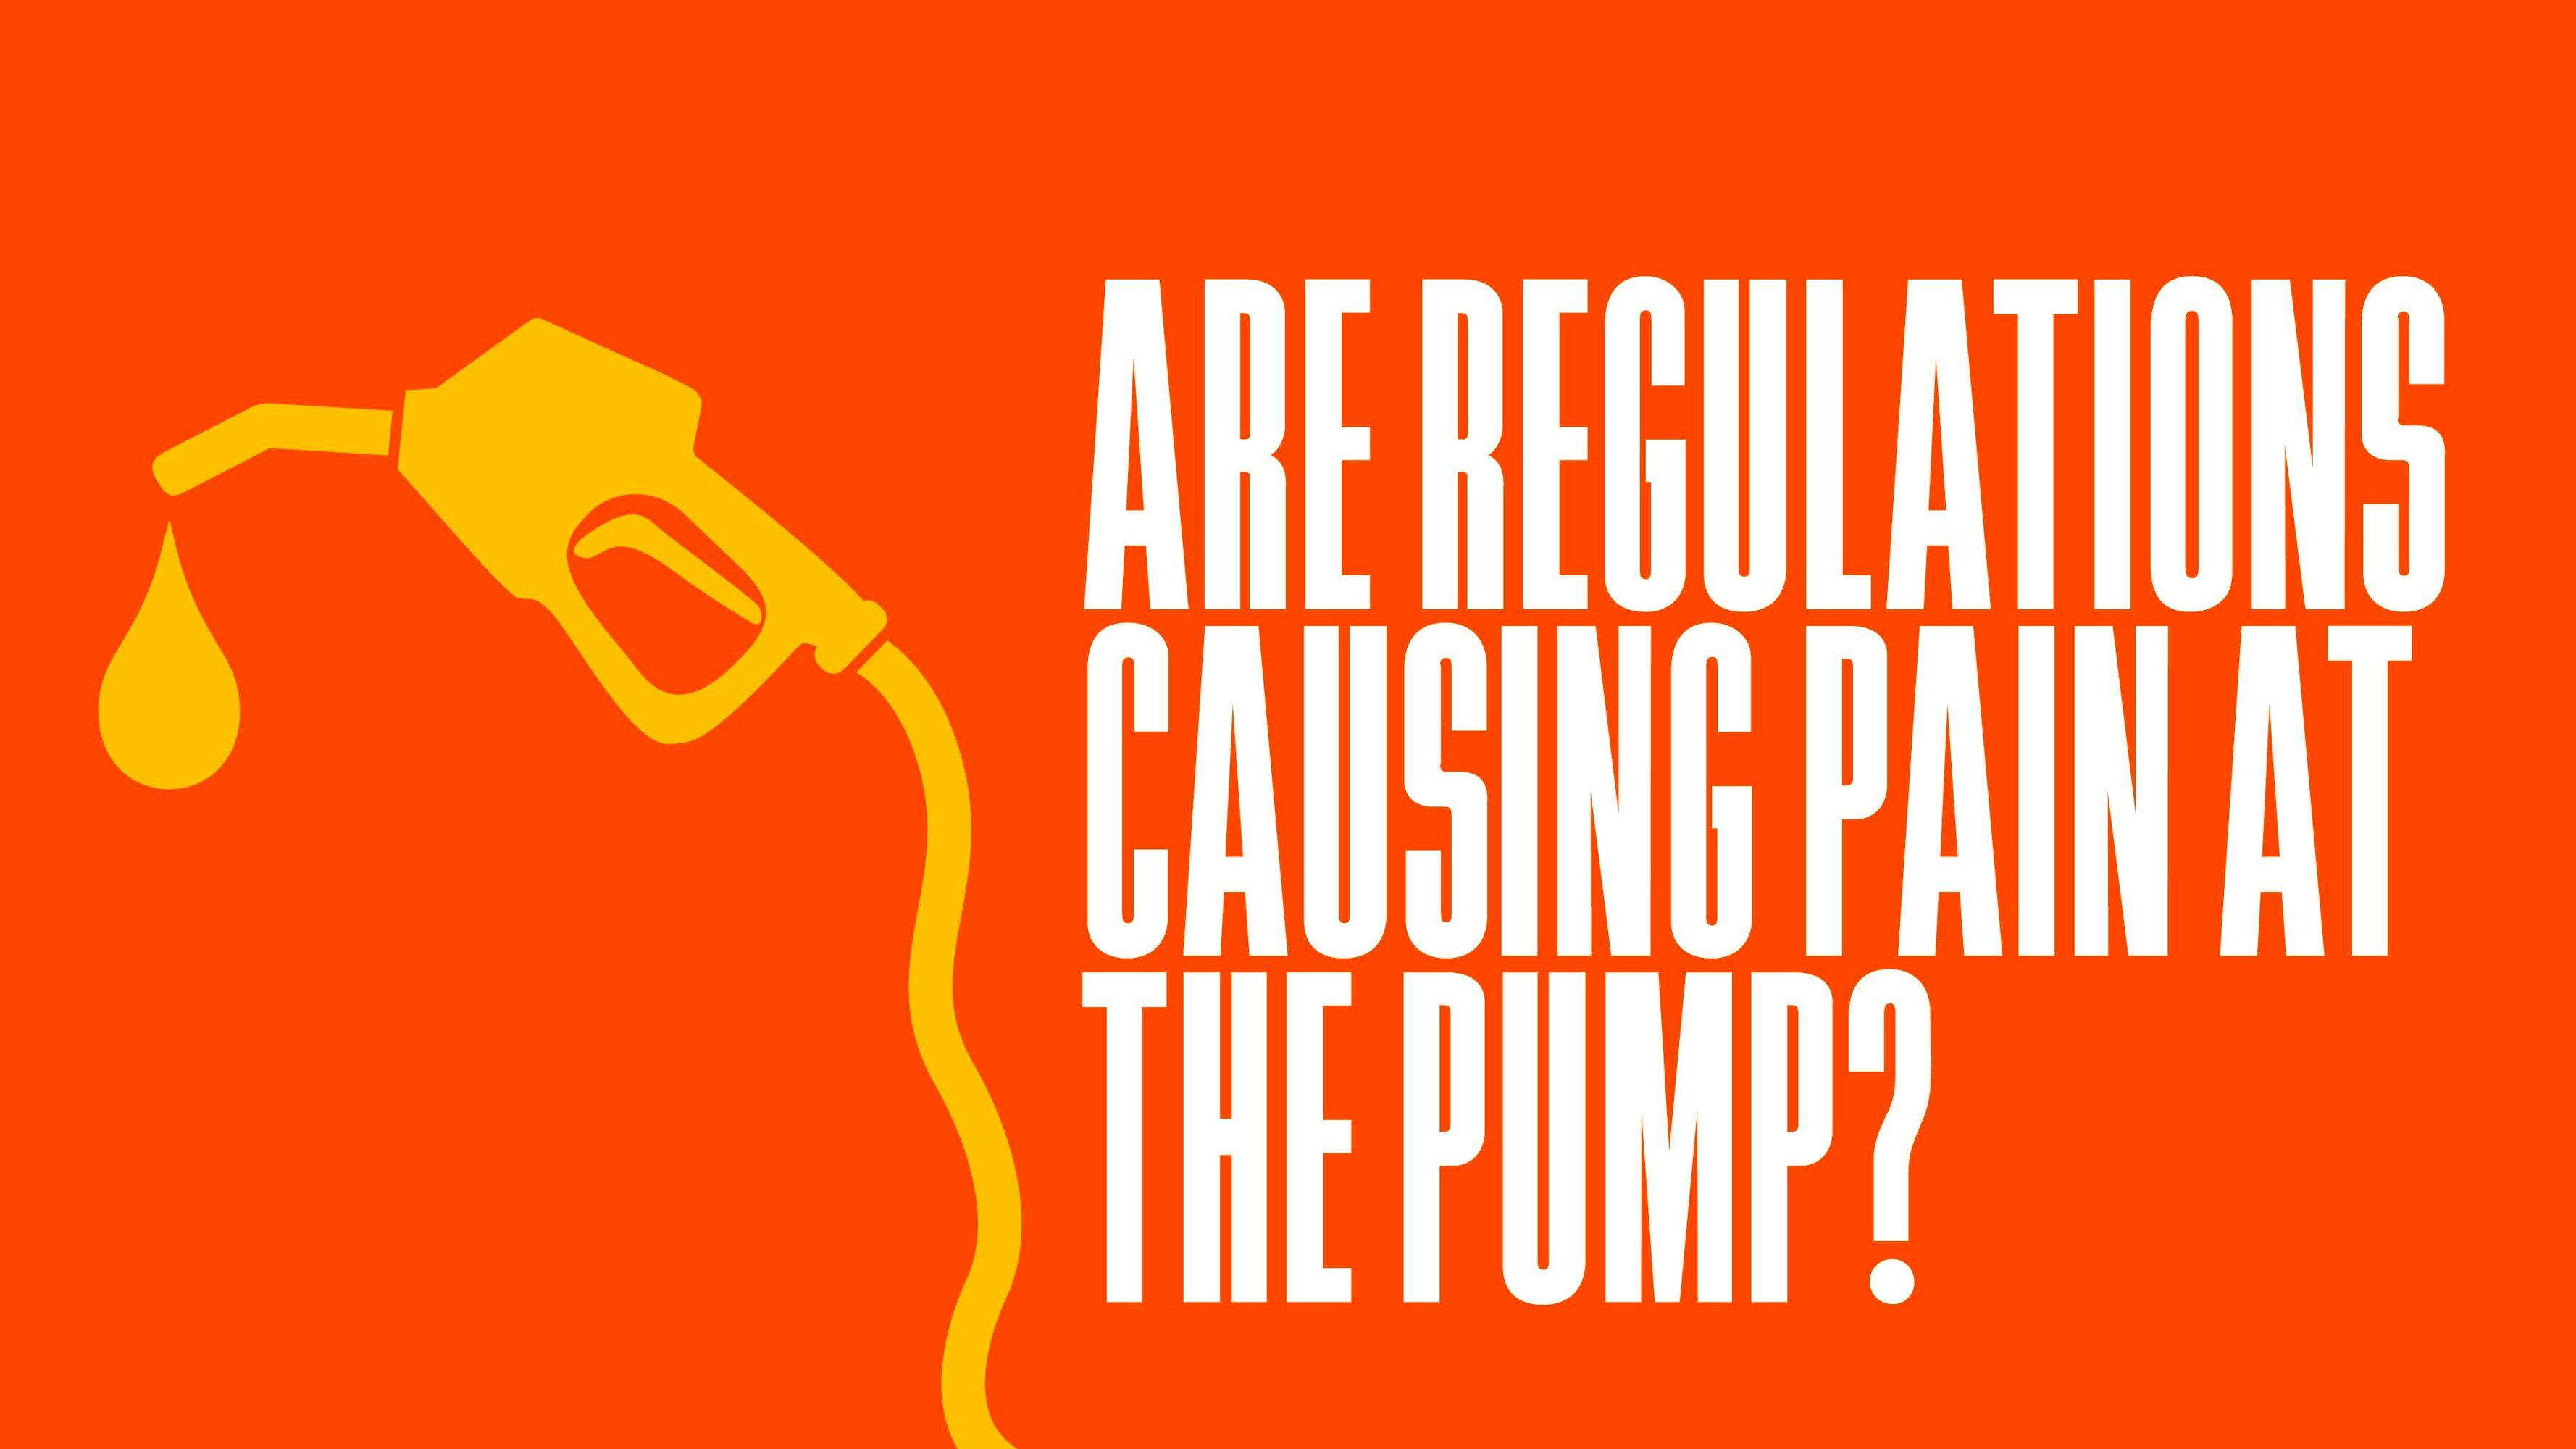 Are Regulations Causing Pain at the Pump?